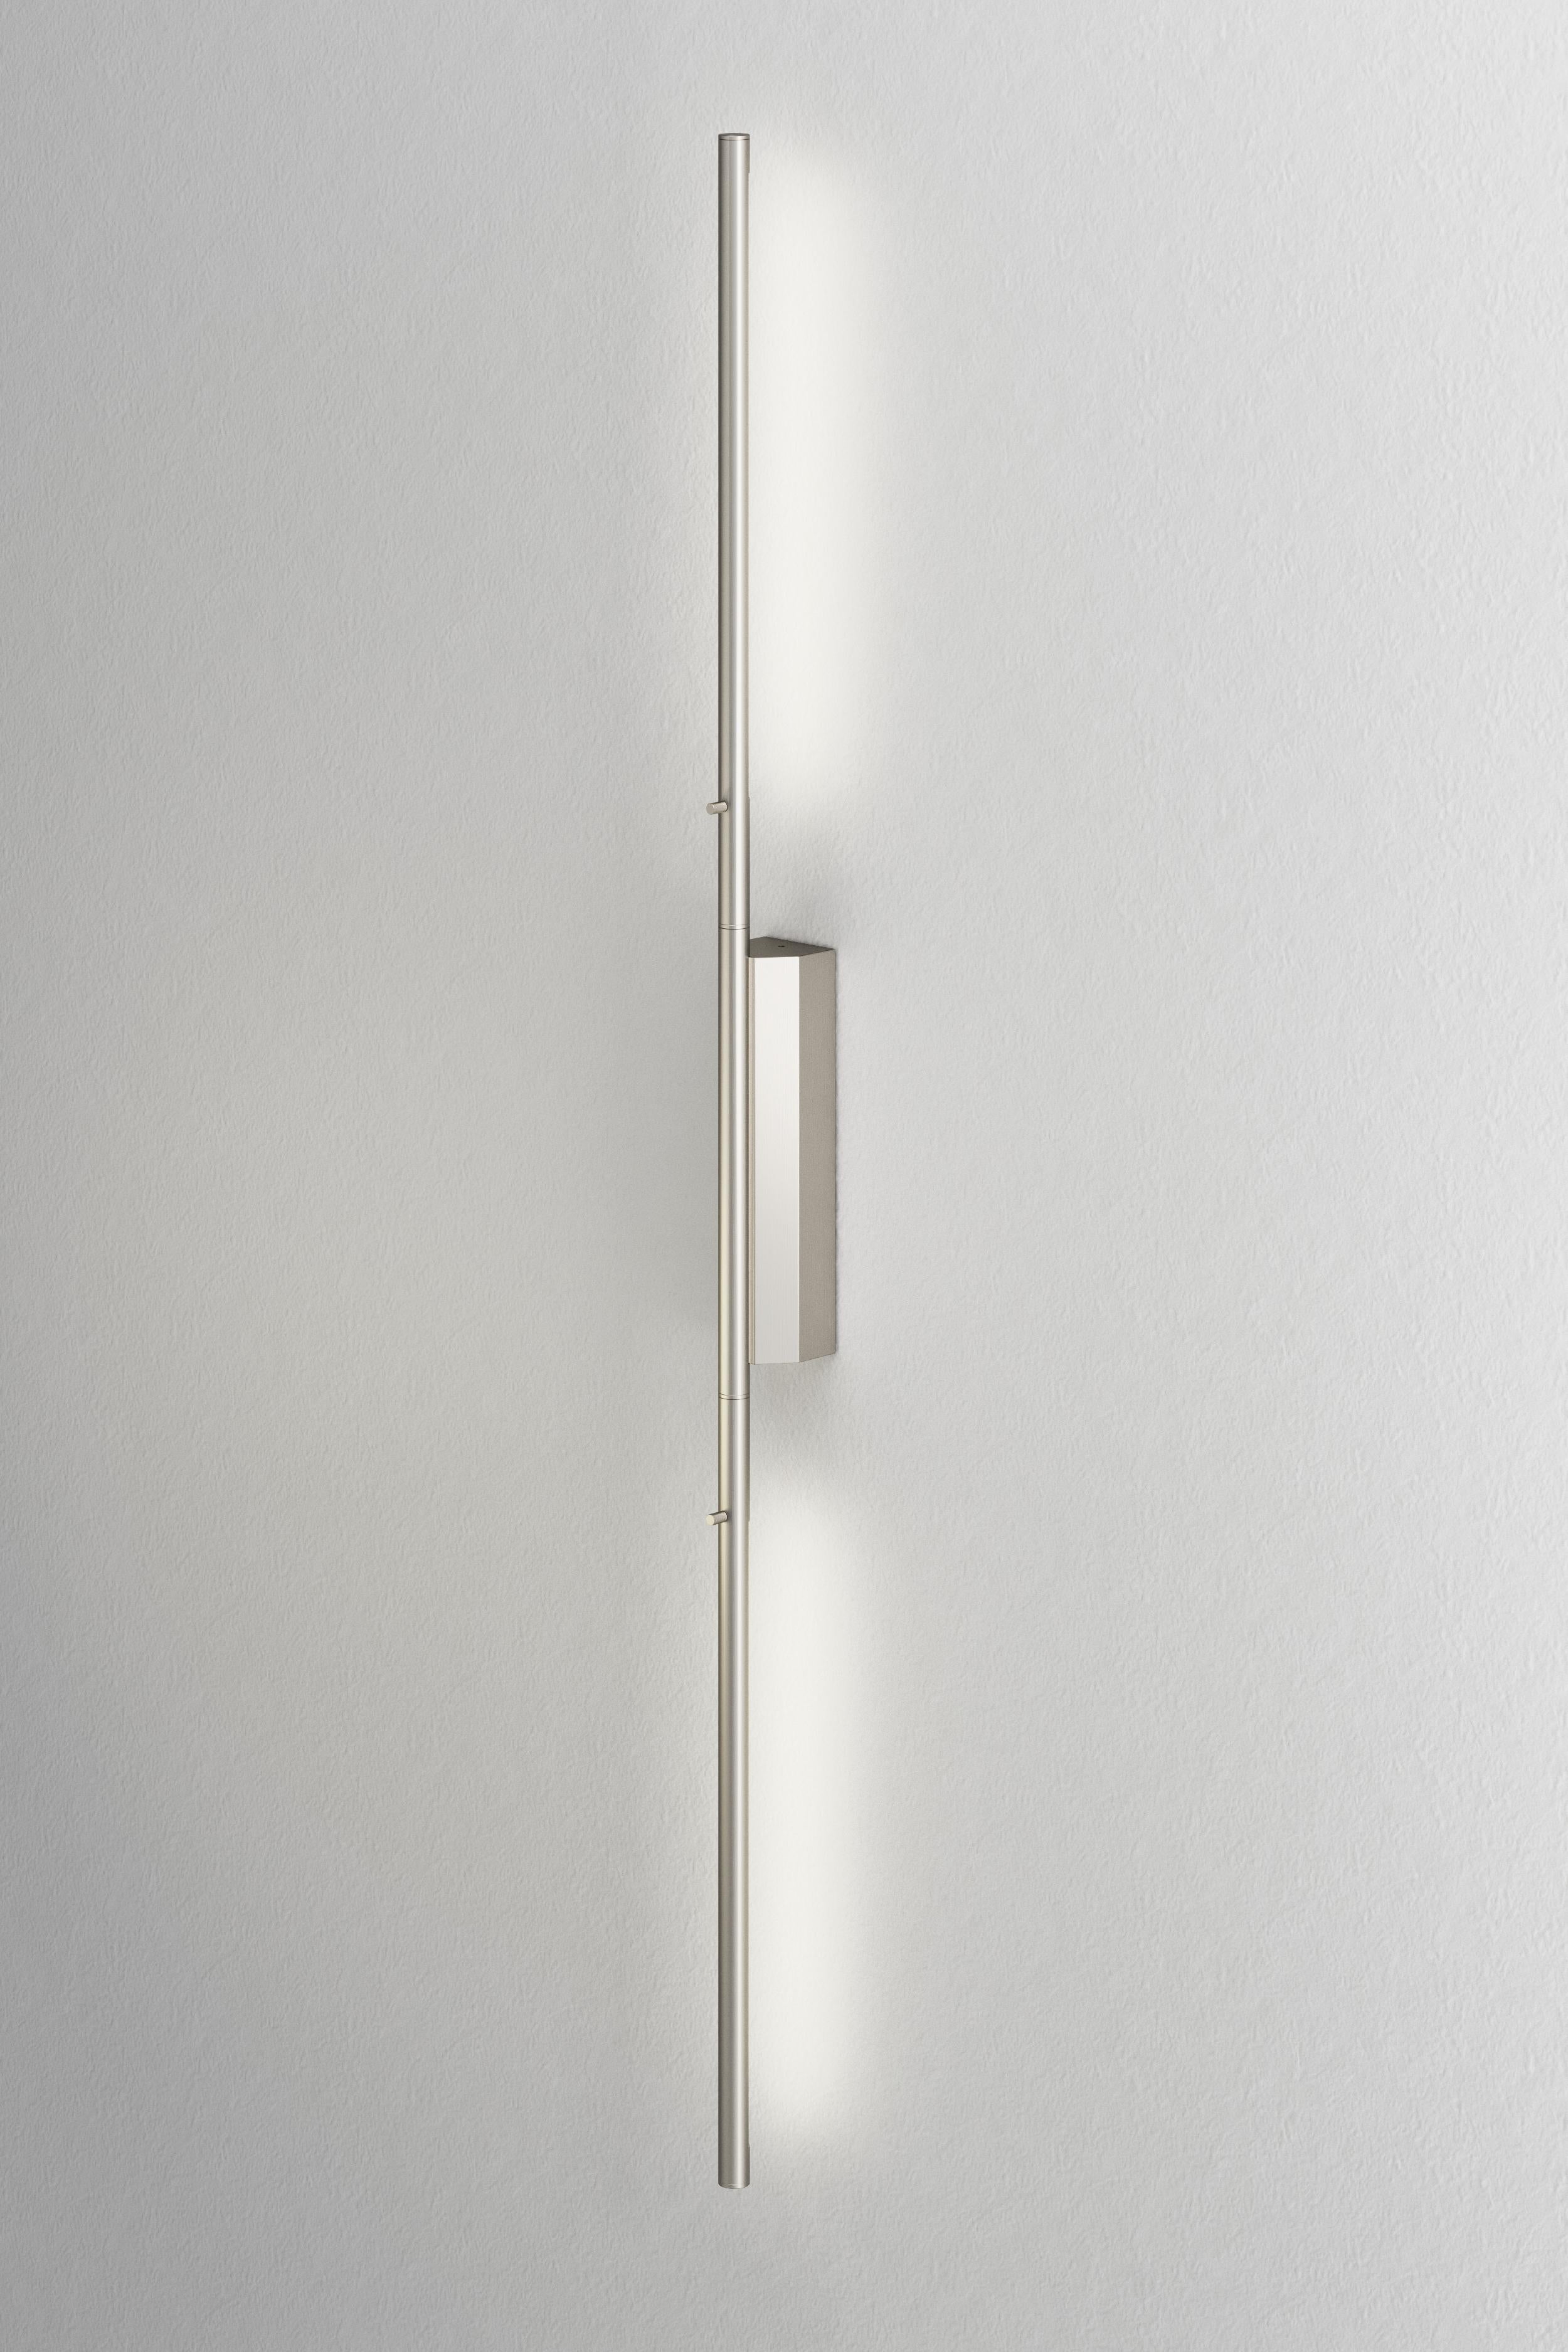 IP link double 960 satin nickel wall light by Emilie Cathelineau
Dimensions: D 4.5 x W 5 x H 96 cm
Materials: Solid brass, Satin nickel, LED, Polycarbonate.
Others finishes and dimensions are available.

All our lamps can be wired according to